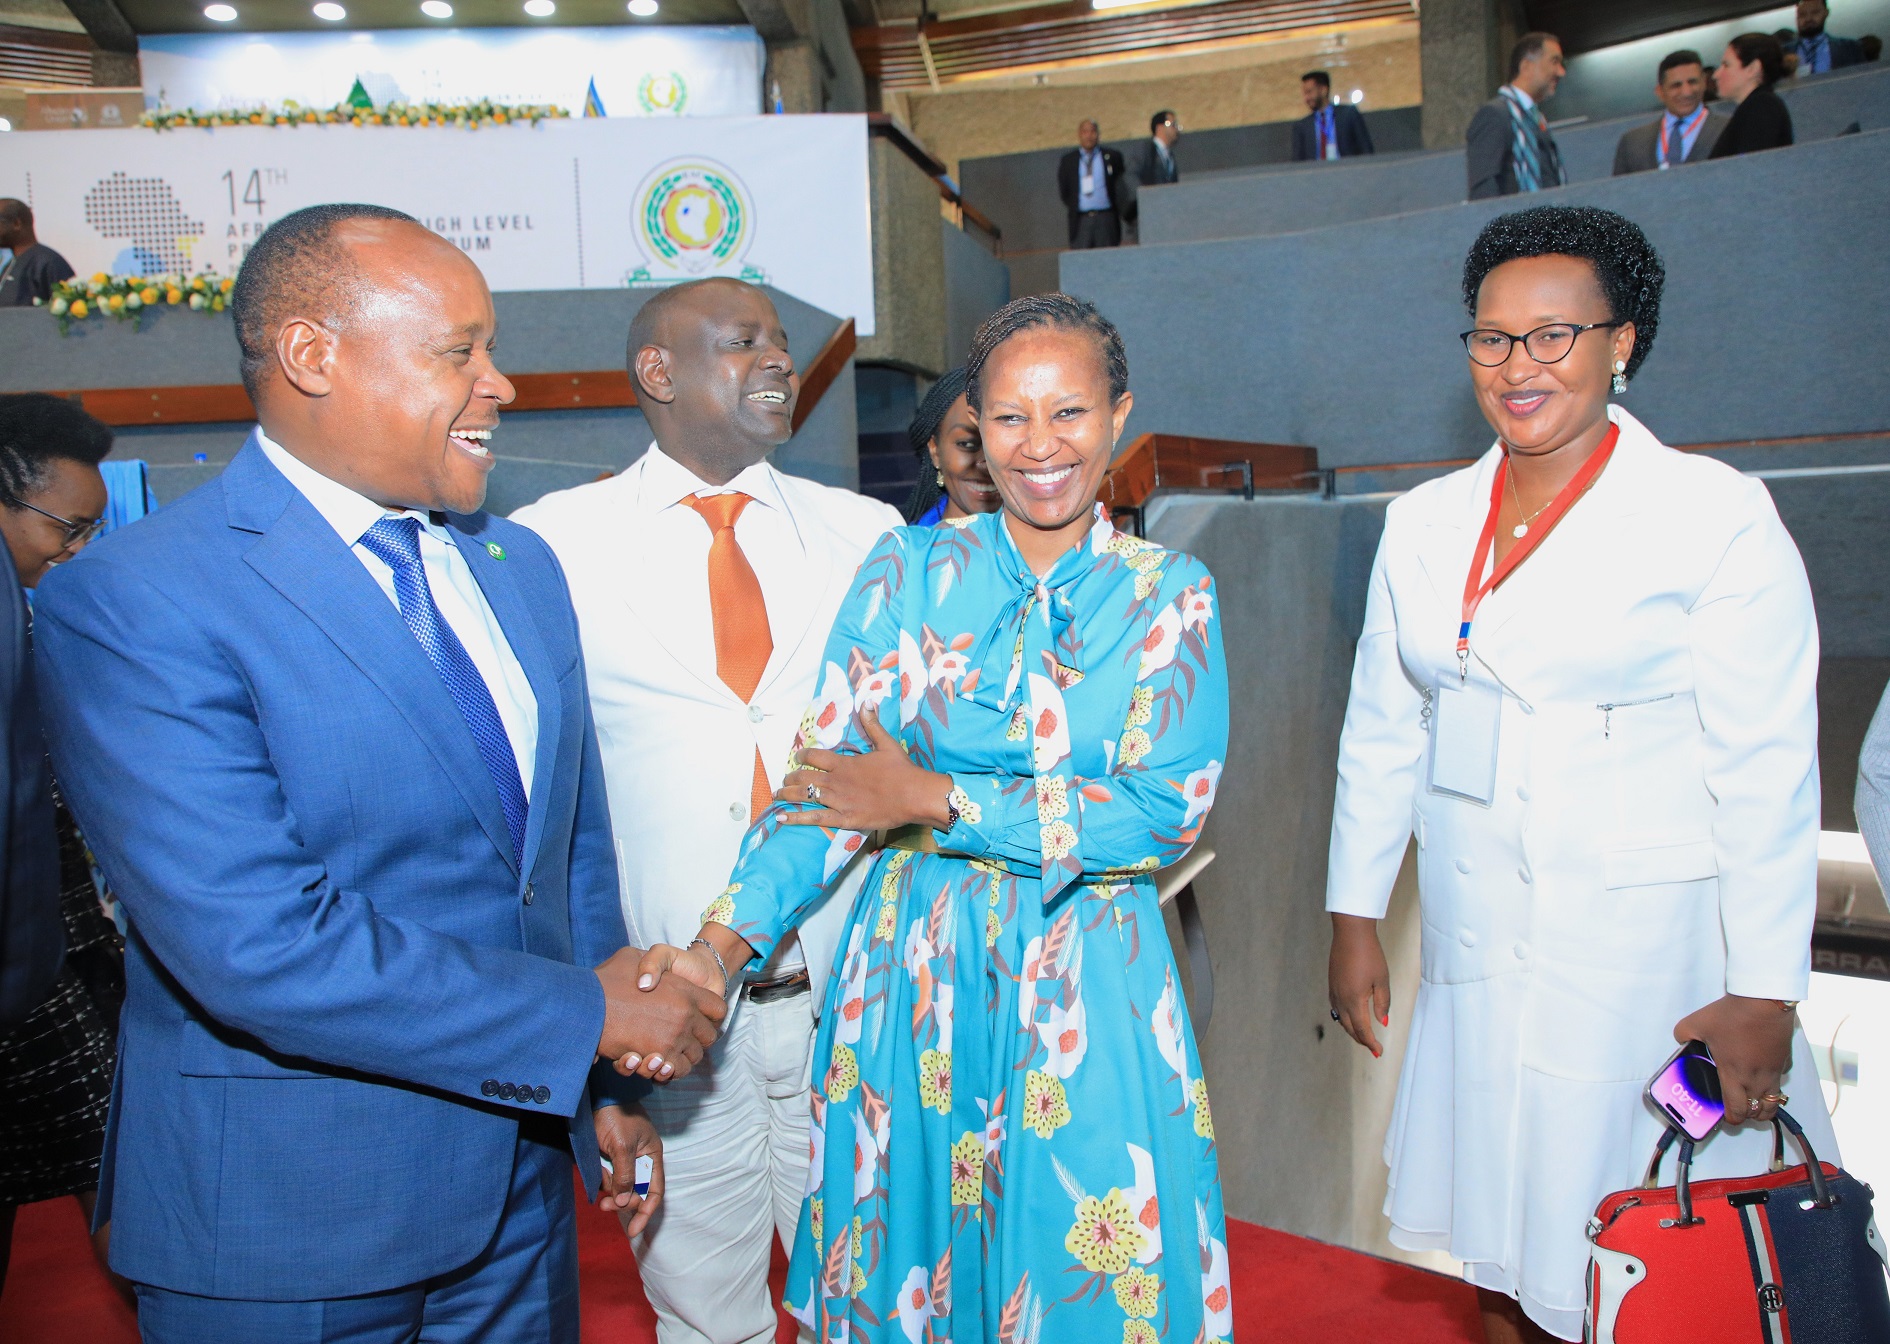 EAC Secretary General, Hon. (Dr.) Peter Mathuki (left) with Ms. Flavia Busingye (second right), the Acting Director of Customs and Trade at the Kenyatta International Convention Centre in Nairobi. Also in the picture is Mr. John Bosco Kalisa, Executive Director – East African Business Council (EABC) and Ms. Amelie Ninganza, EABC Board Member.